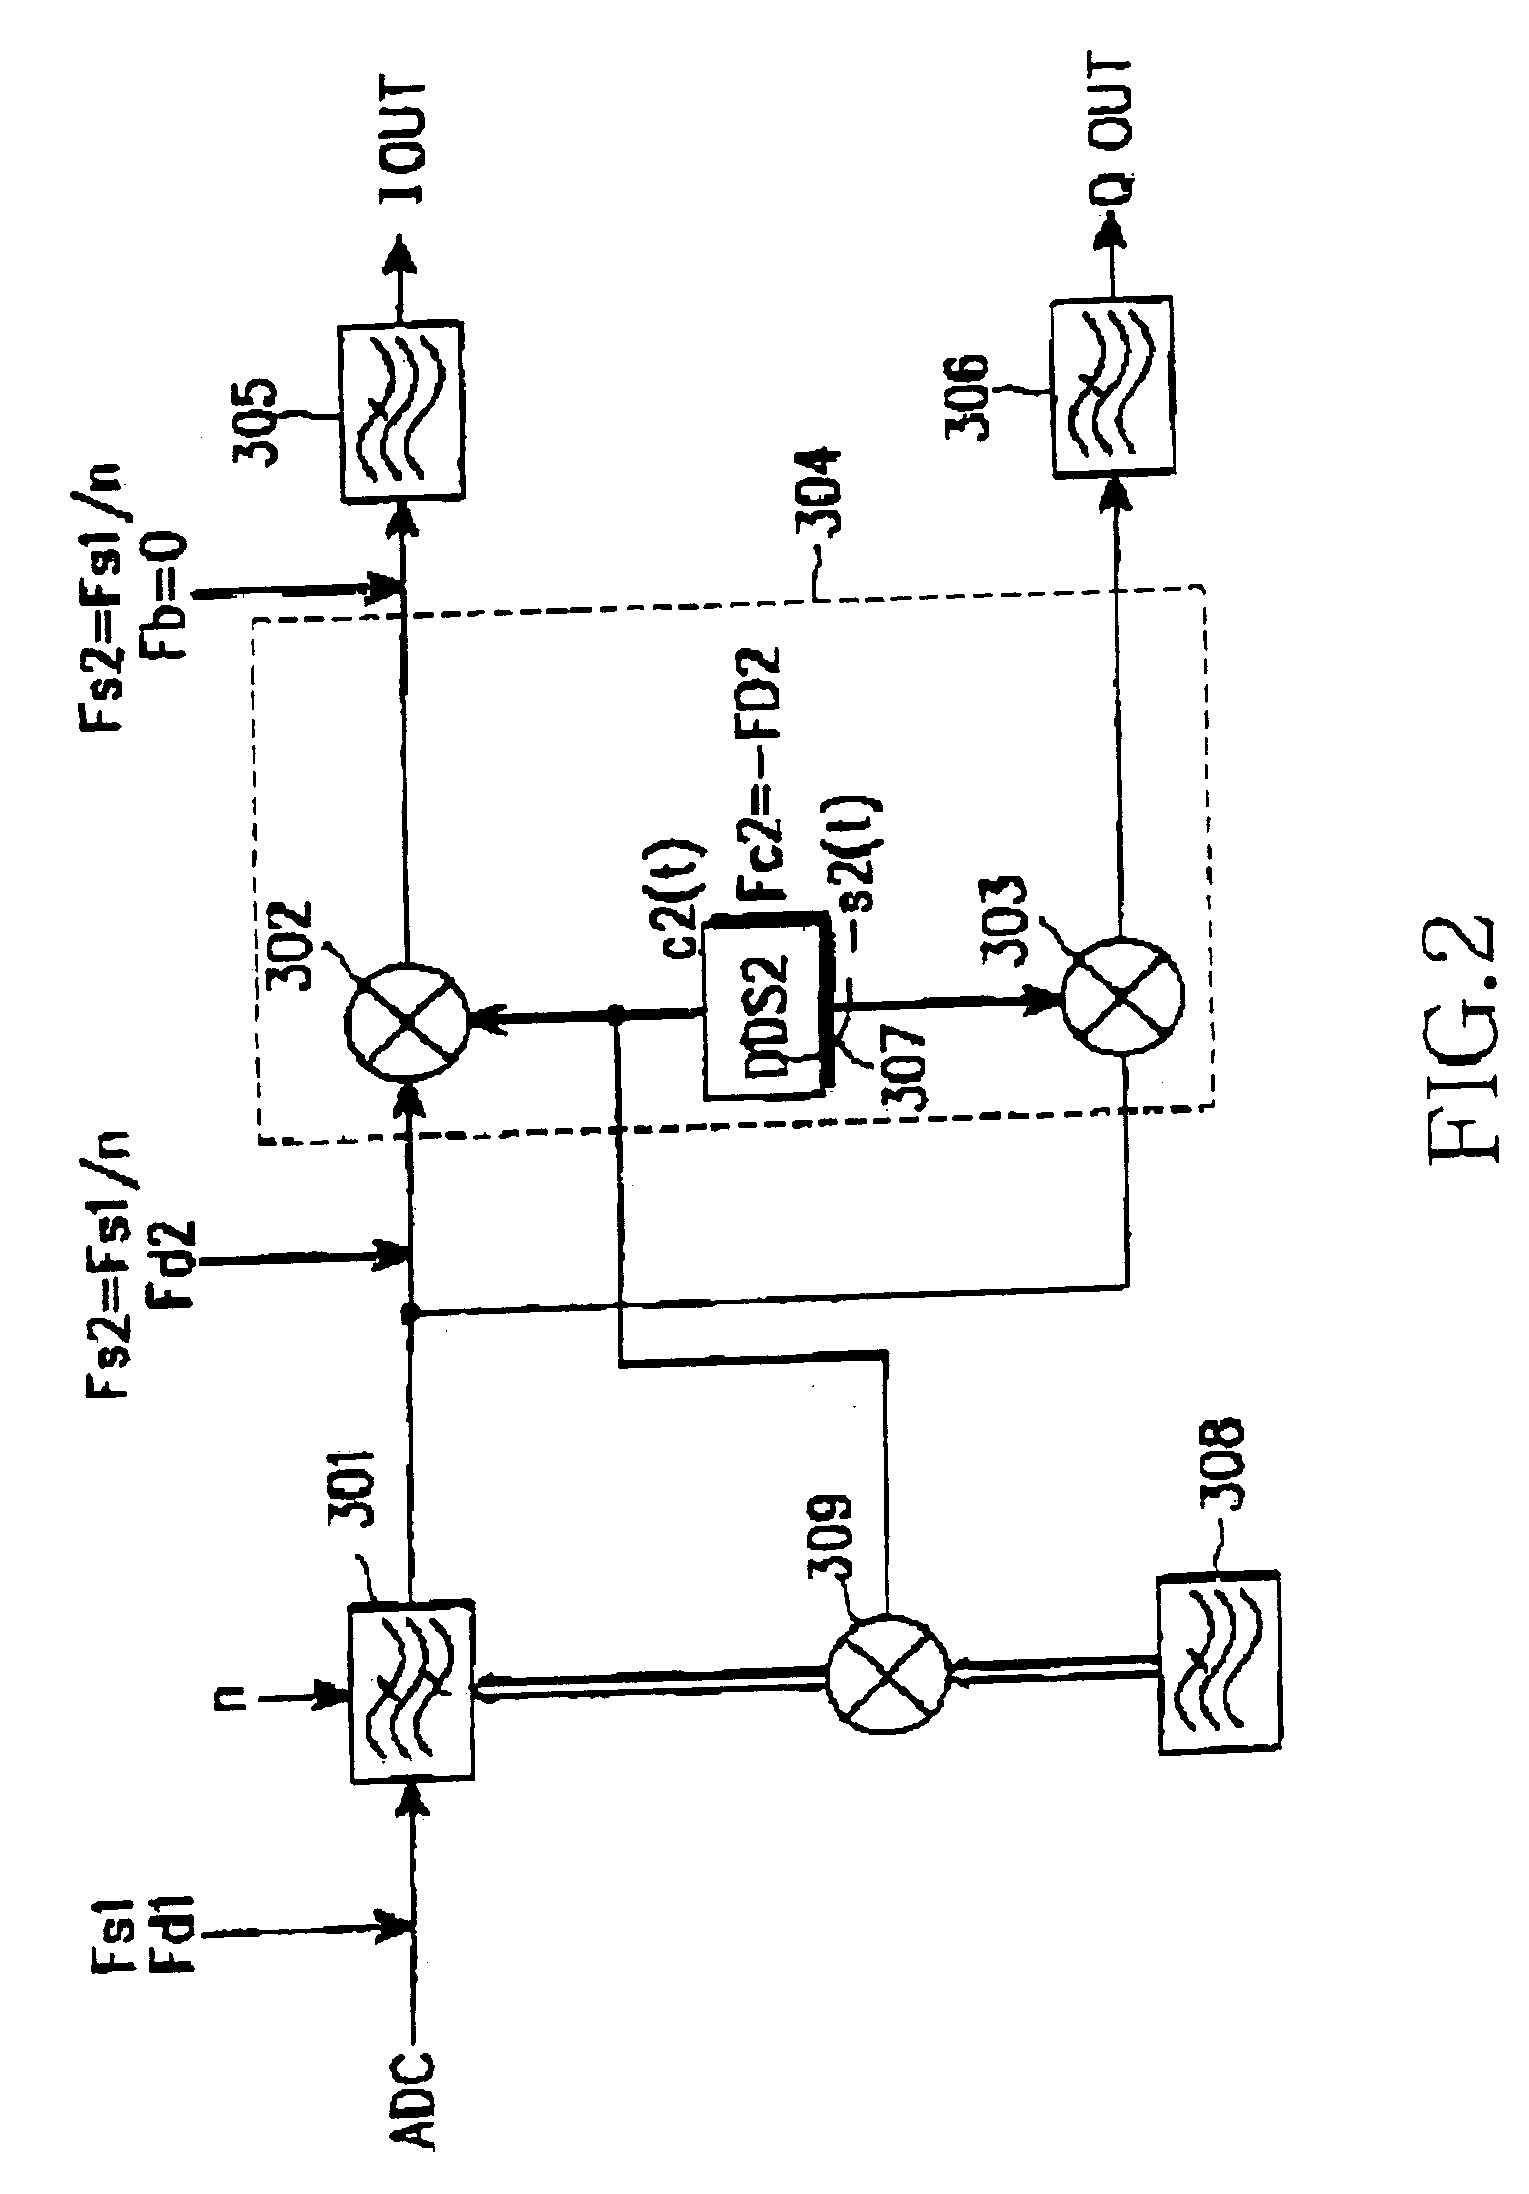 Receiver in a radio communication system